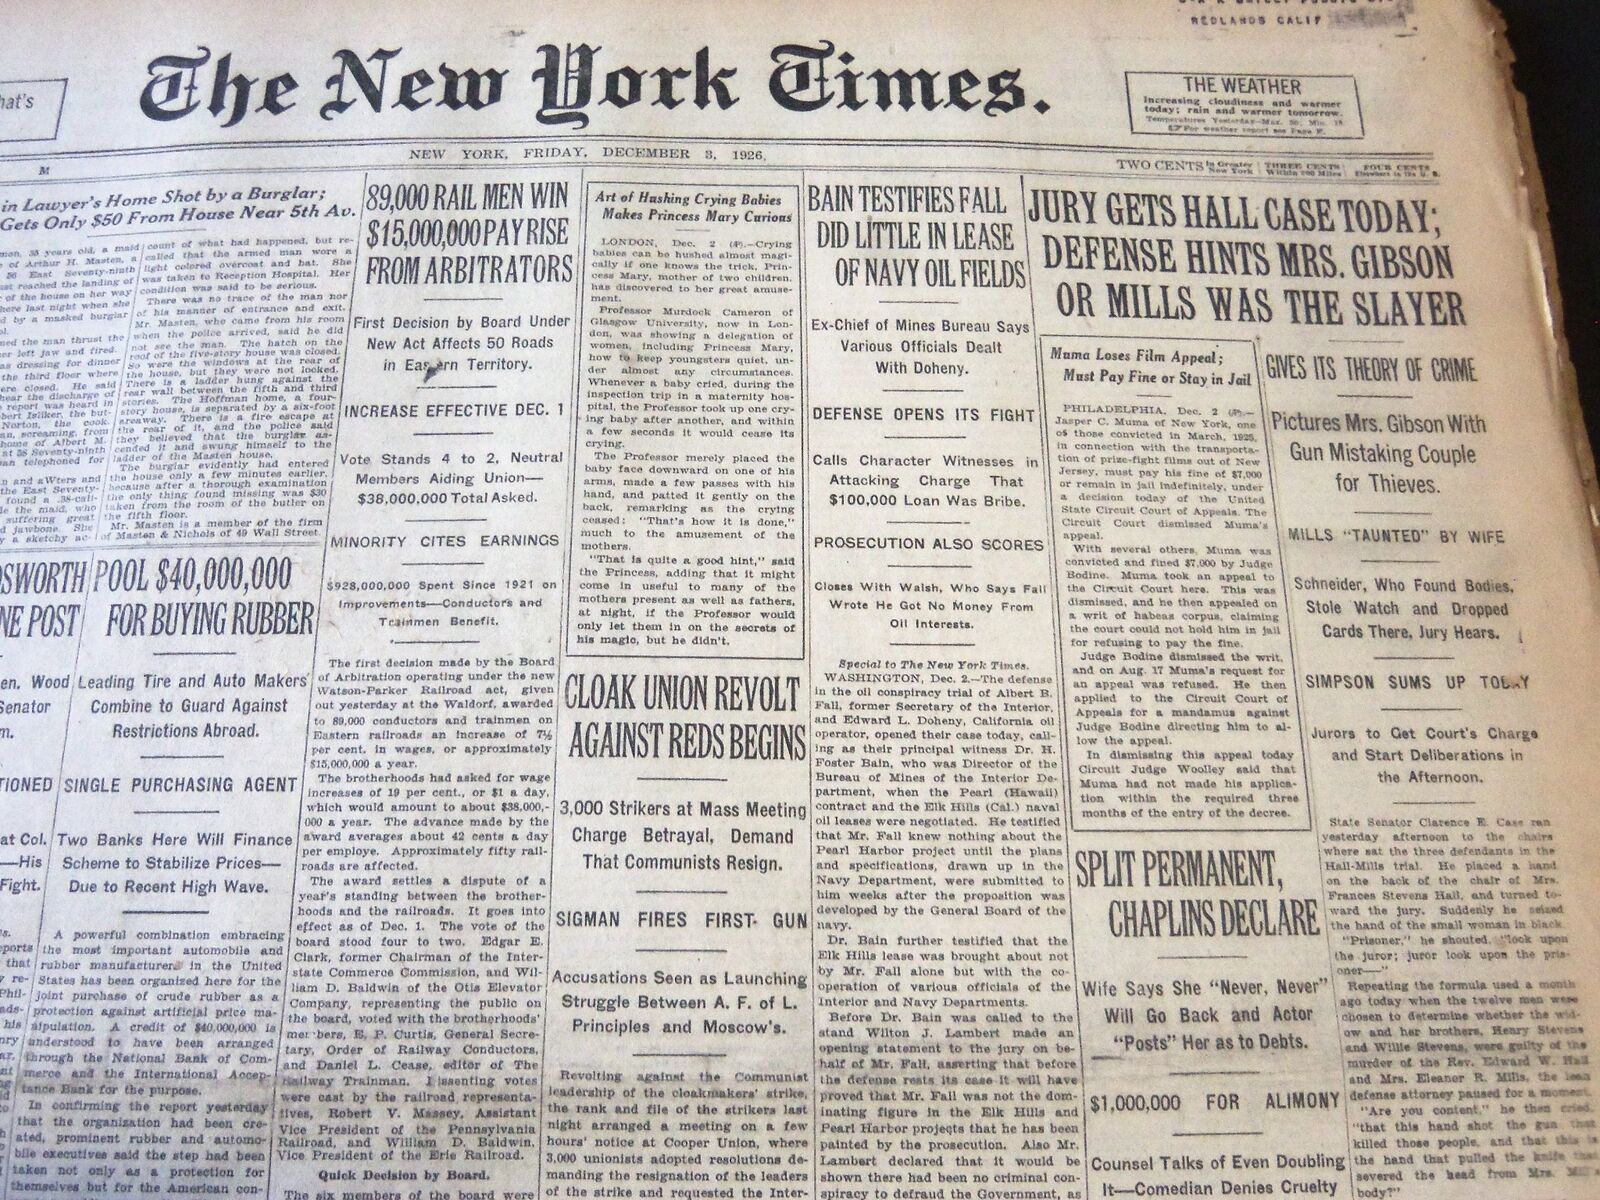 1926 DECEMBER 3 NEW YORK TIMES - JURY GETS HALL CASE TODAY - NT 6549